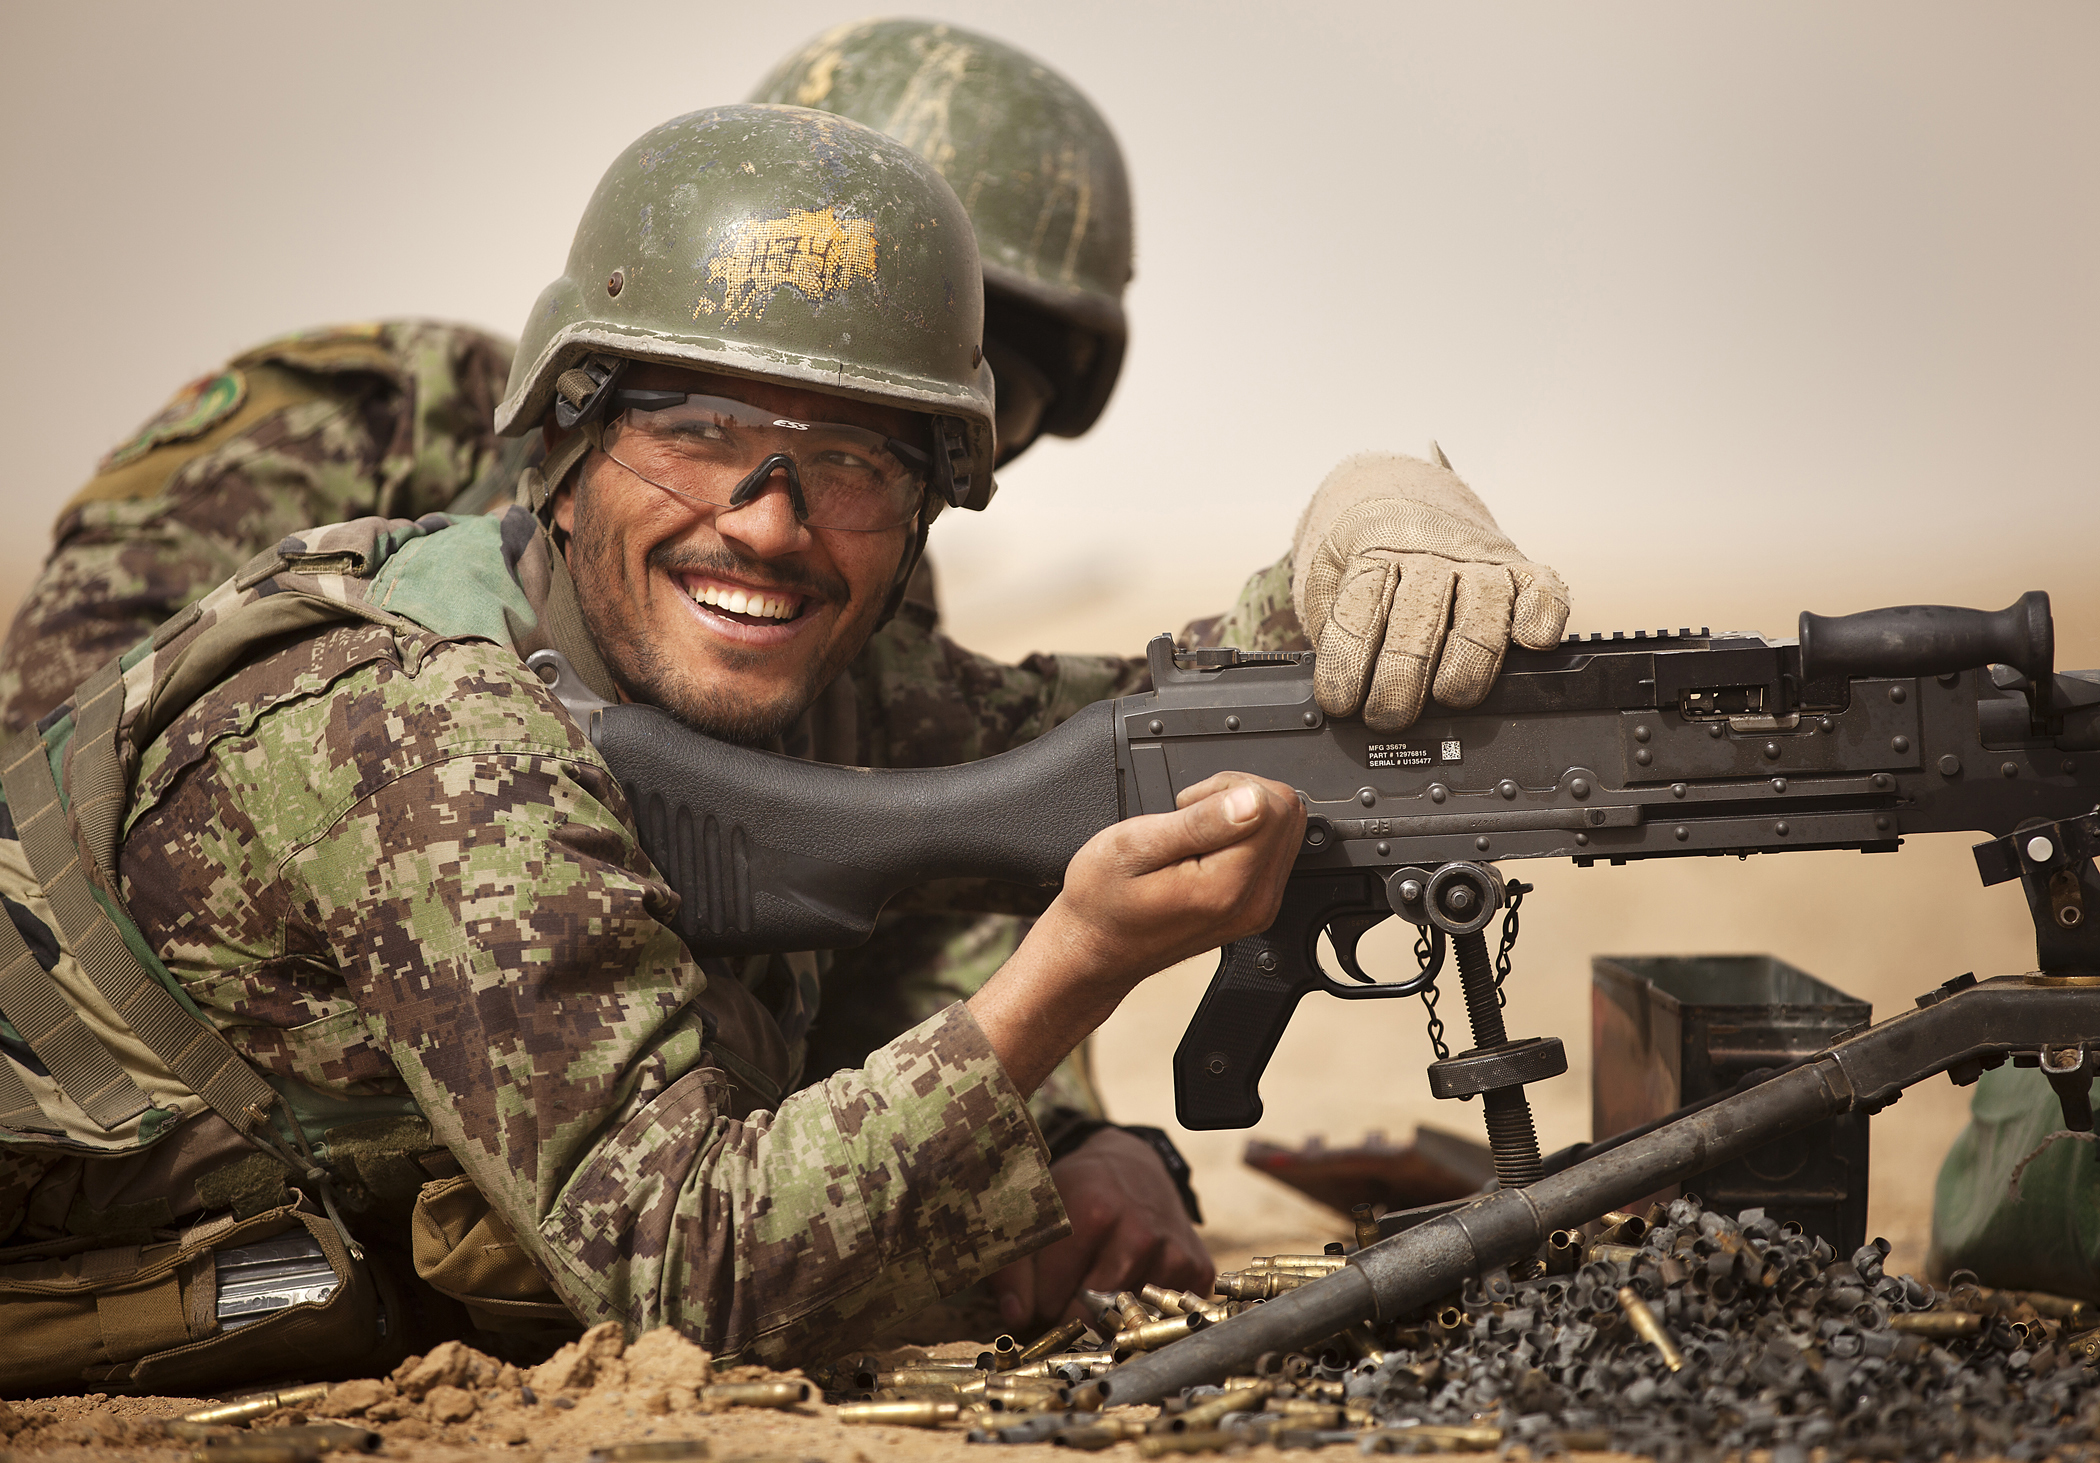 Afghan soldiers develop into machine gun leaders under the guidance of ‘America’s Battalion’ [Image 3 of 9]